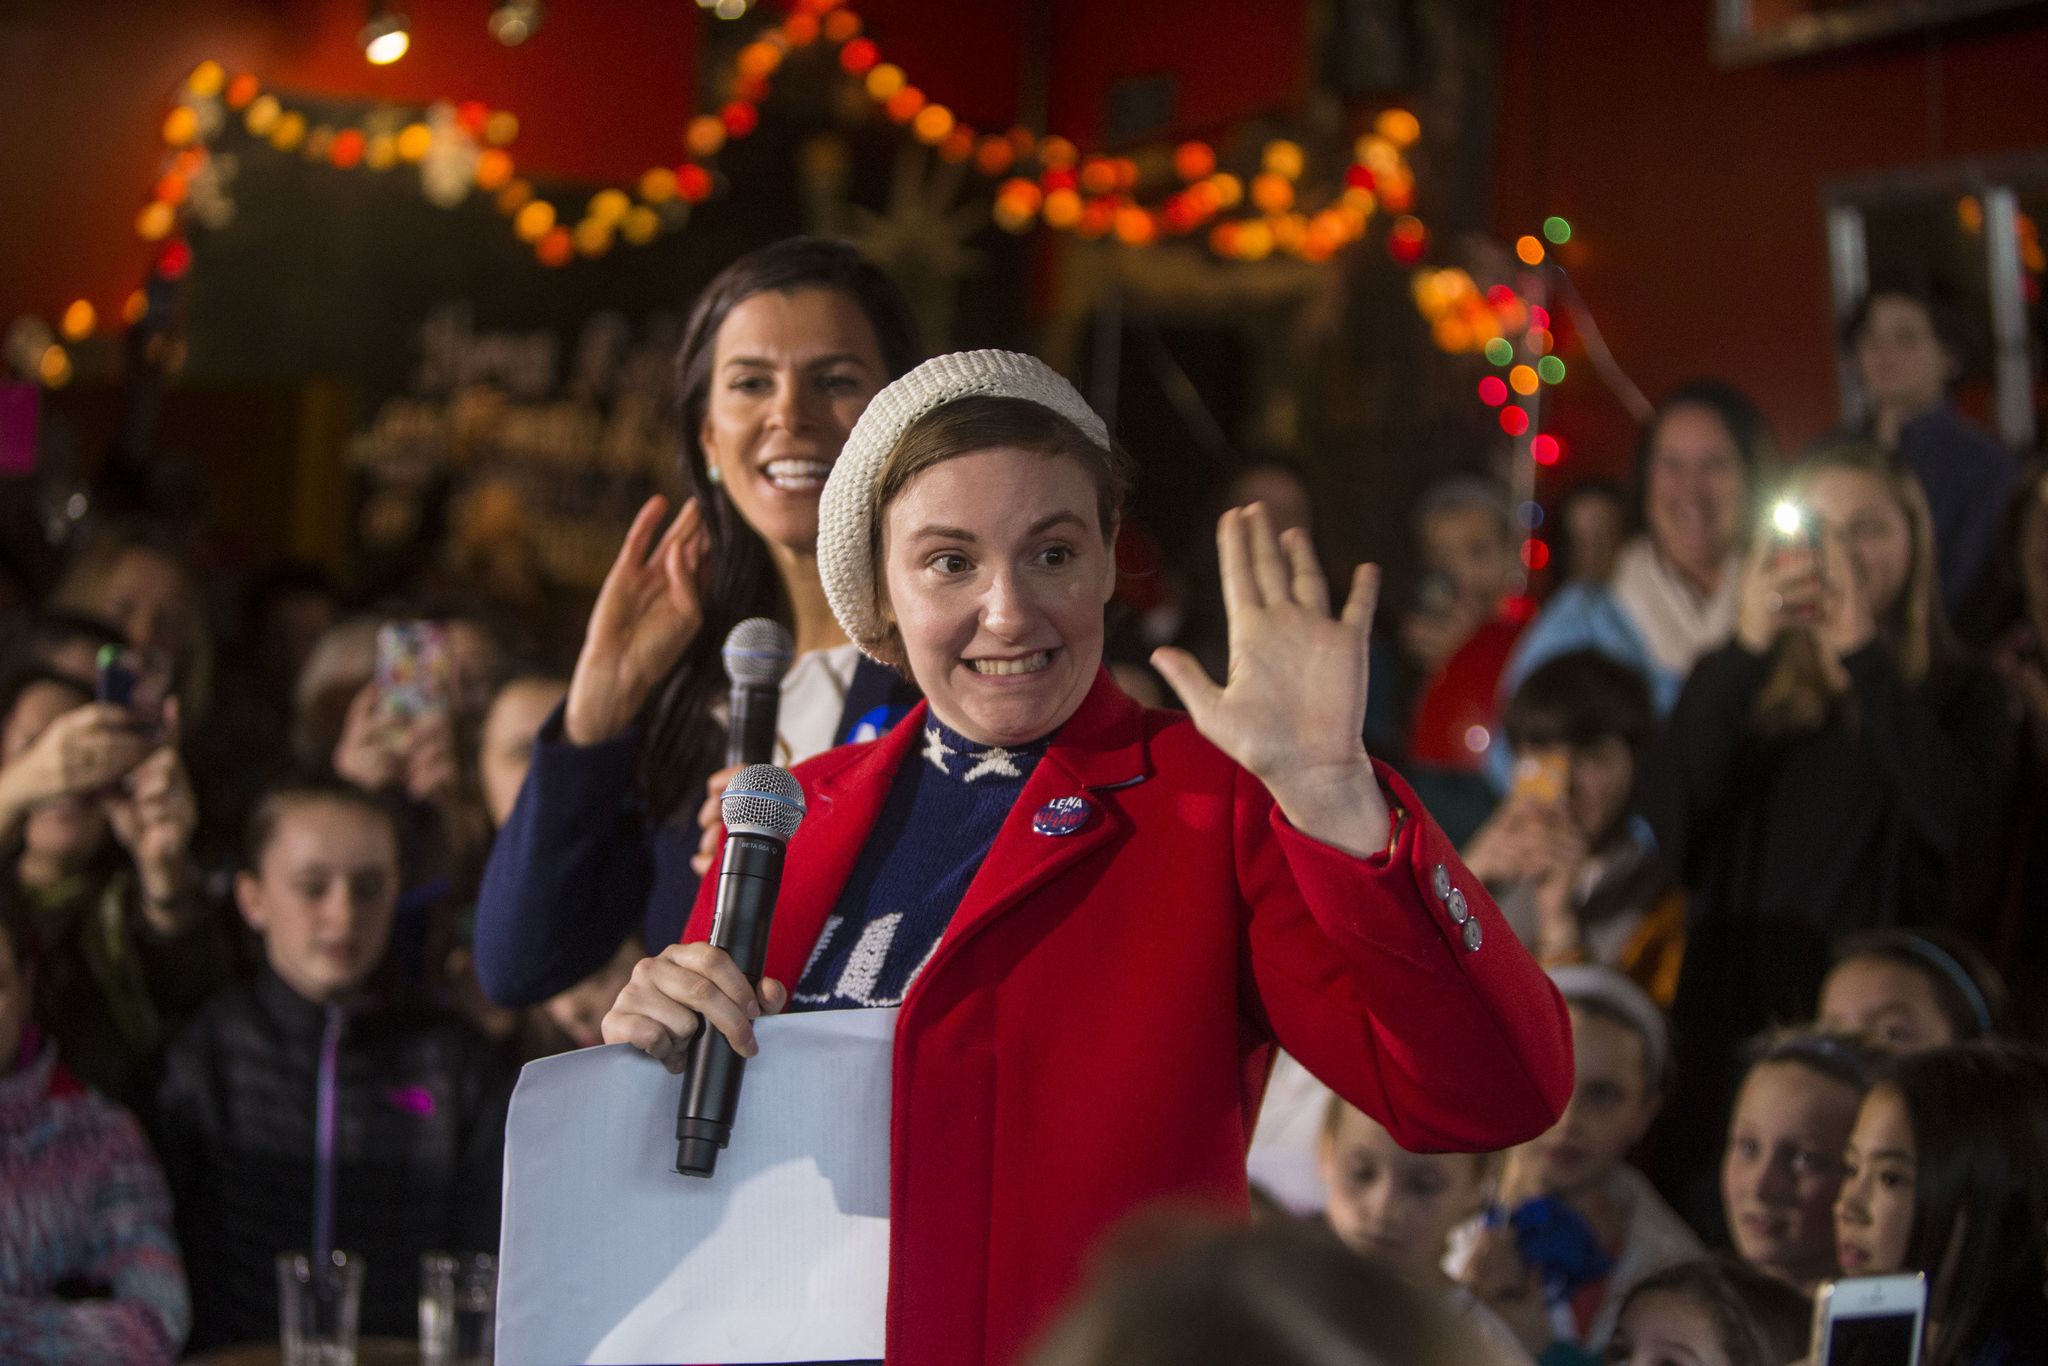 MANCHESTER, NH - JANUARY 08:  Screenwriter and actress Lena Dunham speaks to a crowd at a Hillary Clinton for President event on January 8, 2016 in Manchester, New Hampshire. Dunham highlighted Democratic presidential candidate Hillary Clinton's commitment to standing up for women and girls.